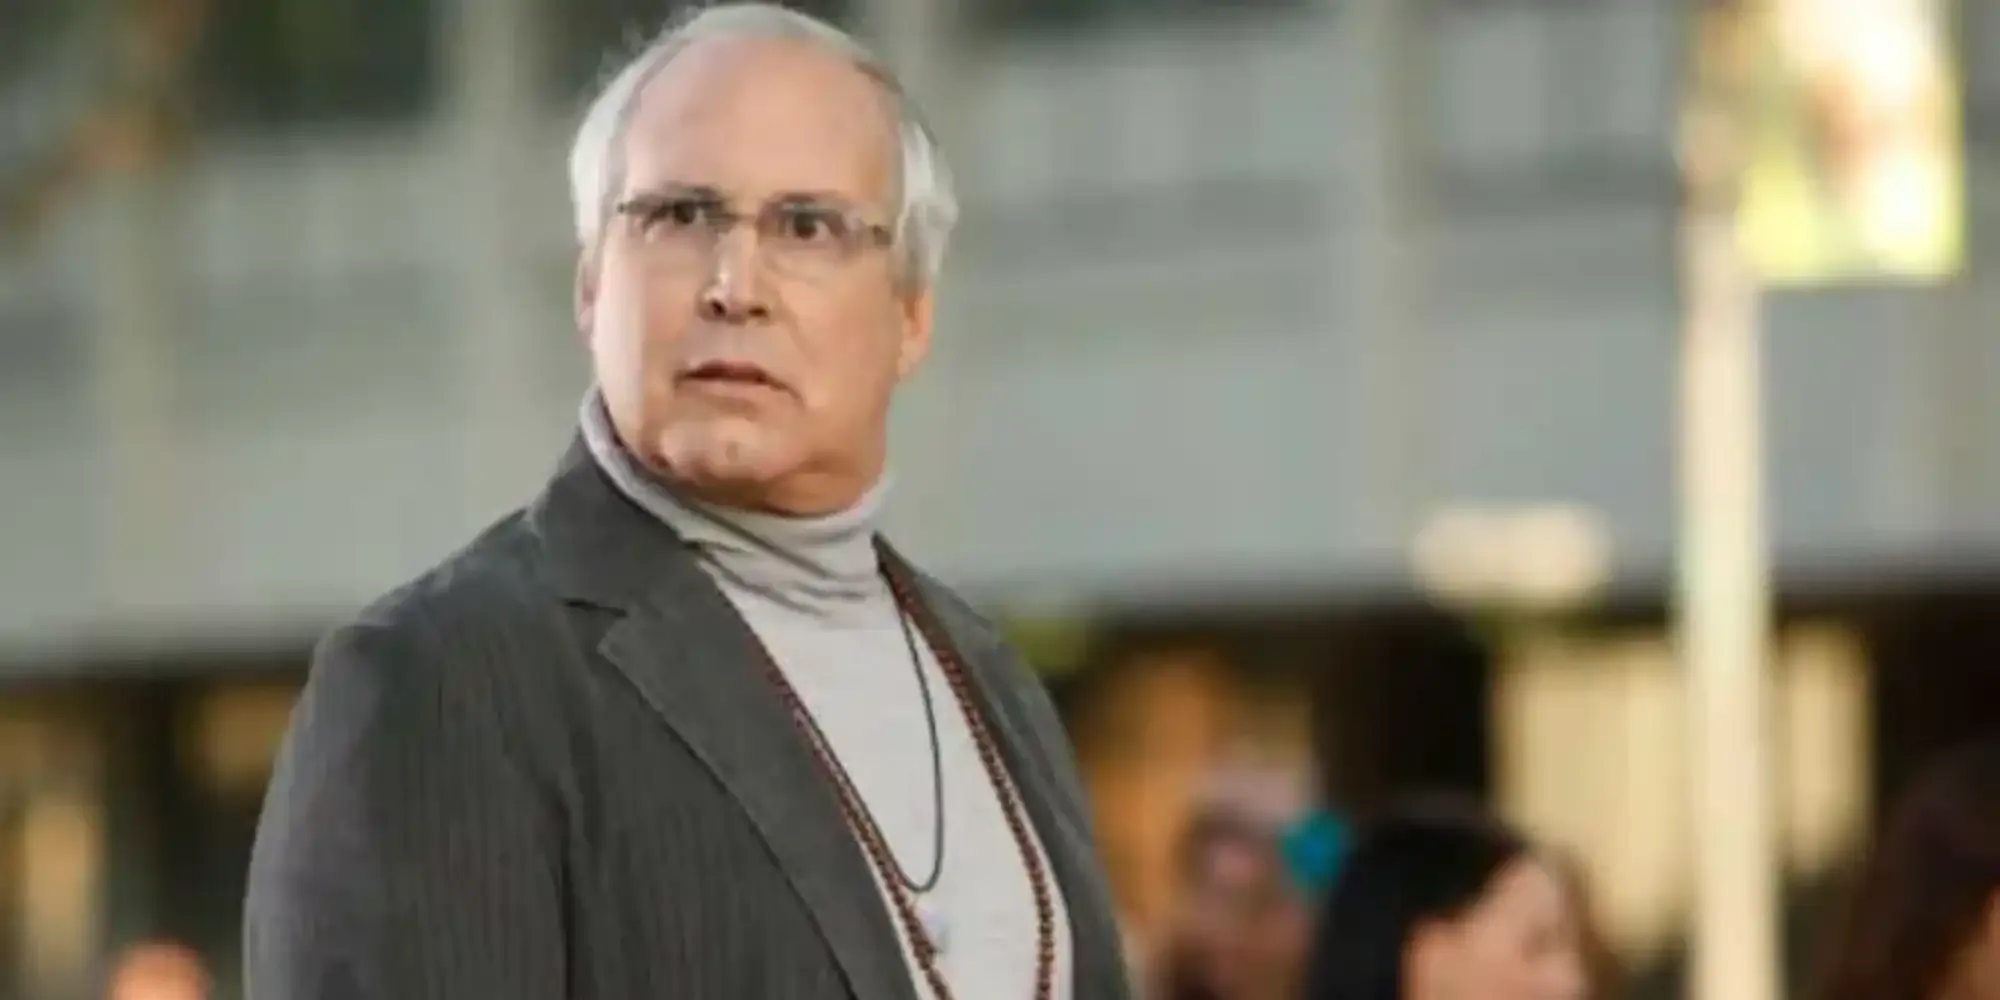 Chevy Chase looks quizically off camera